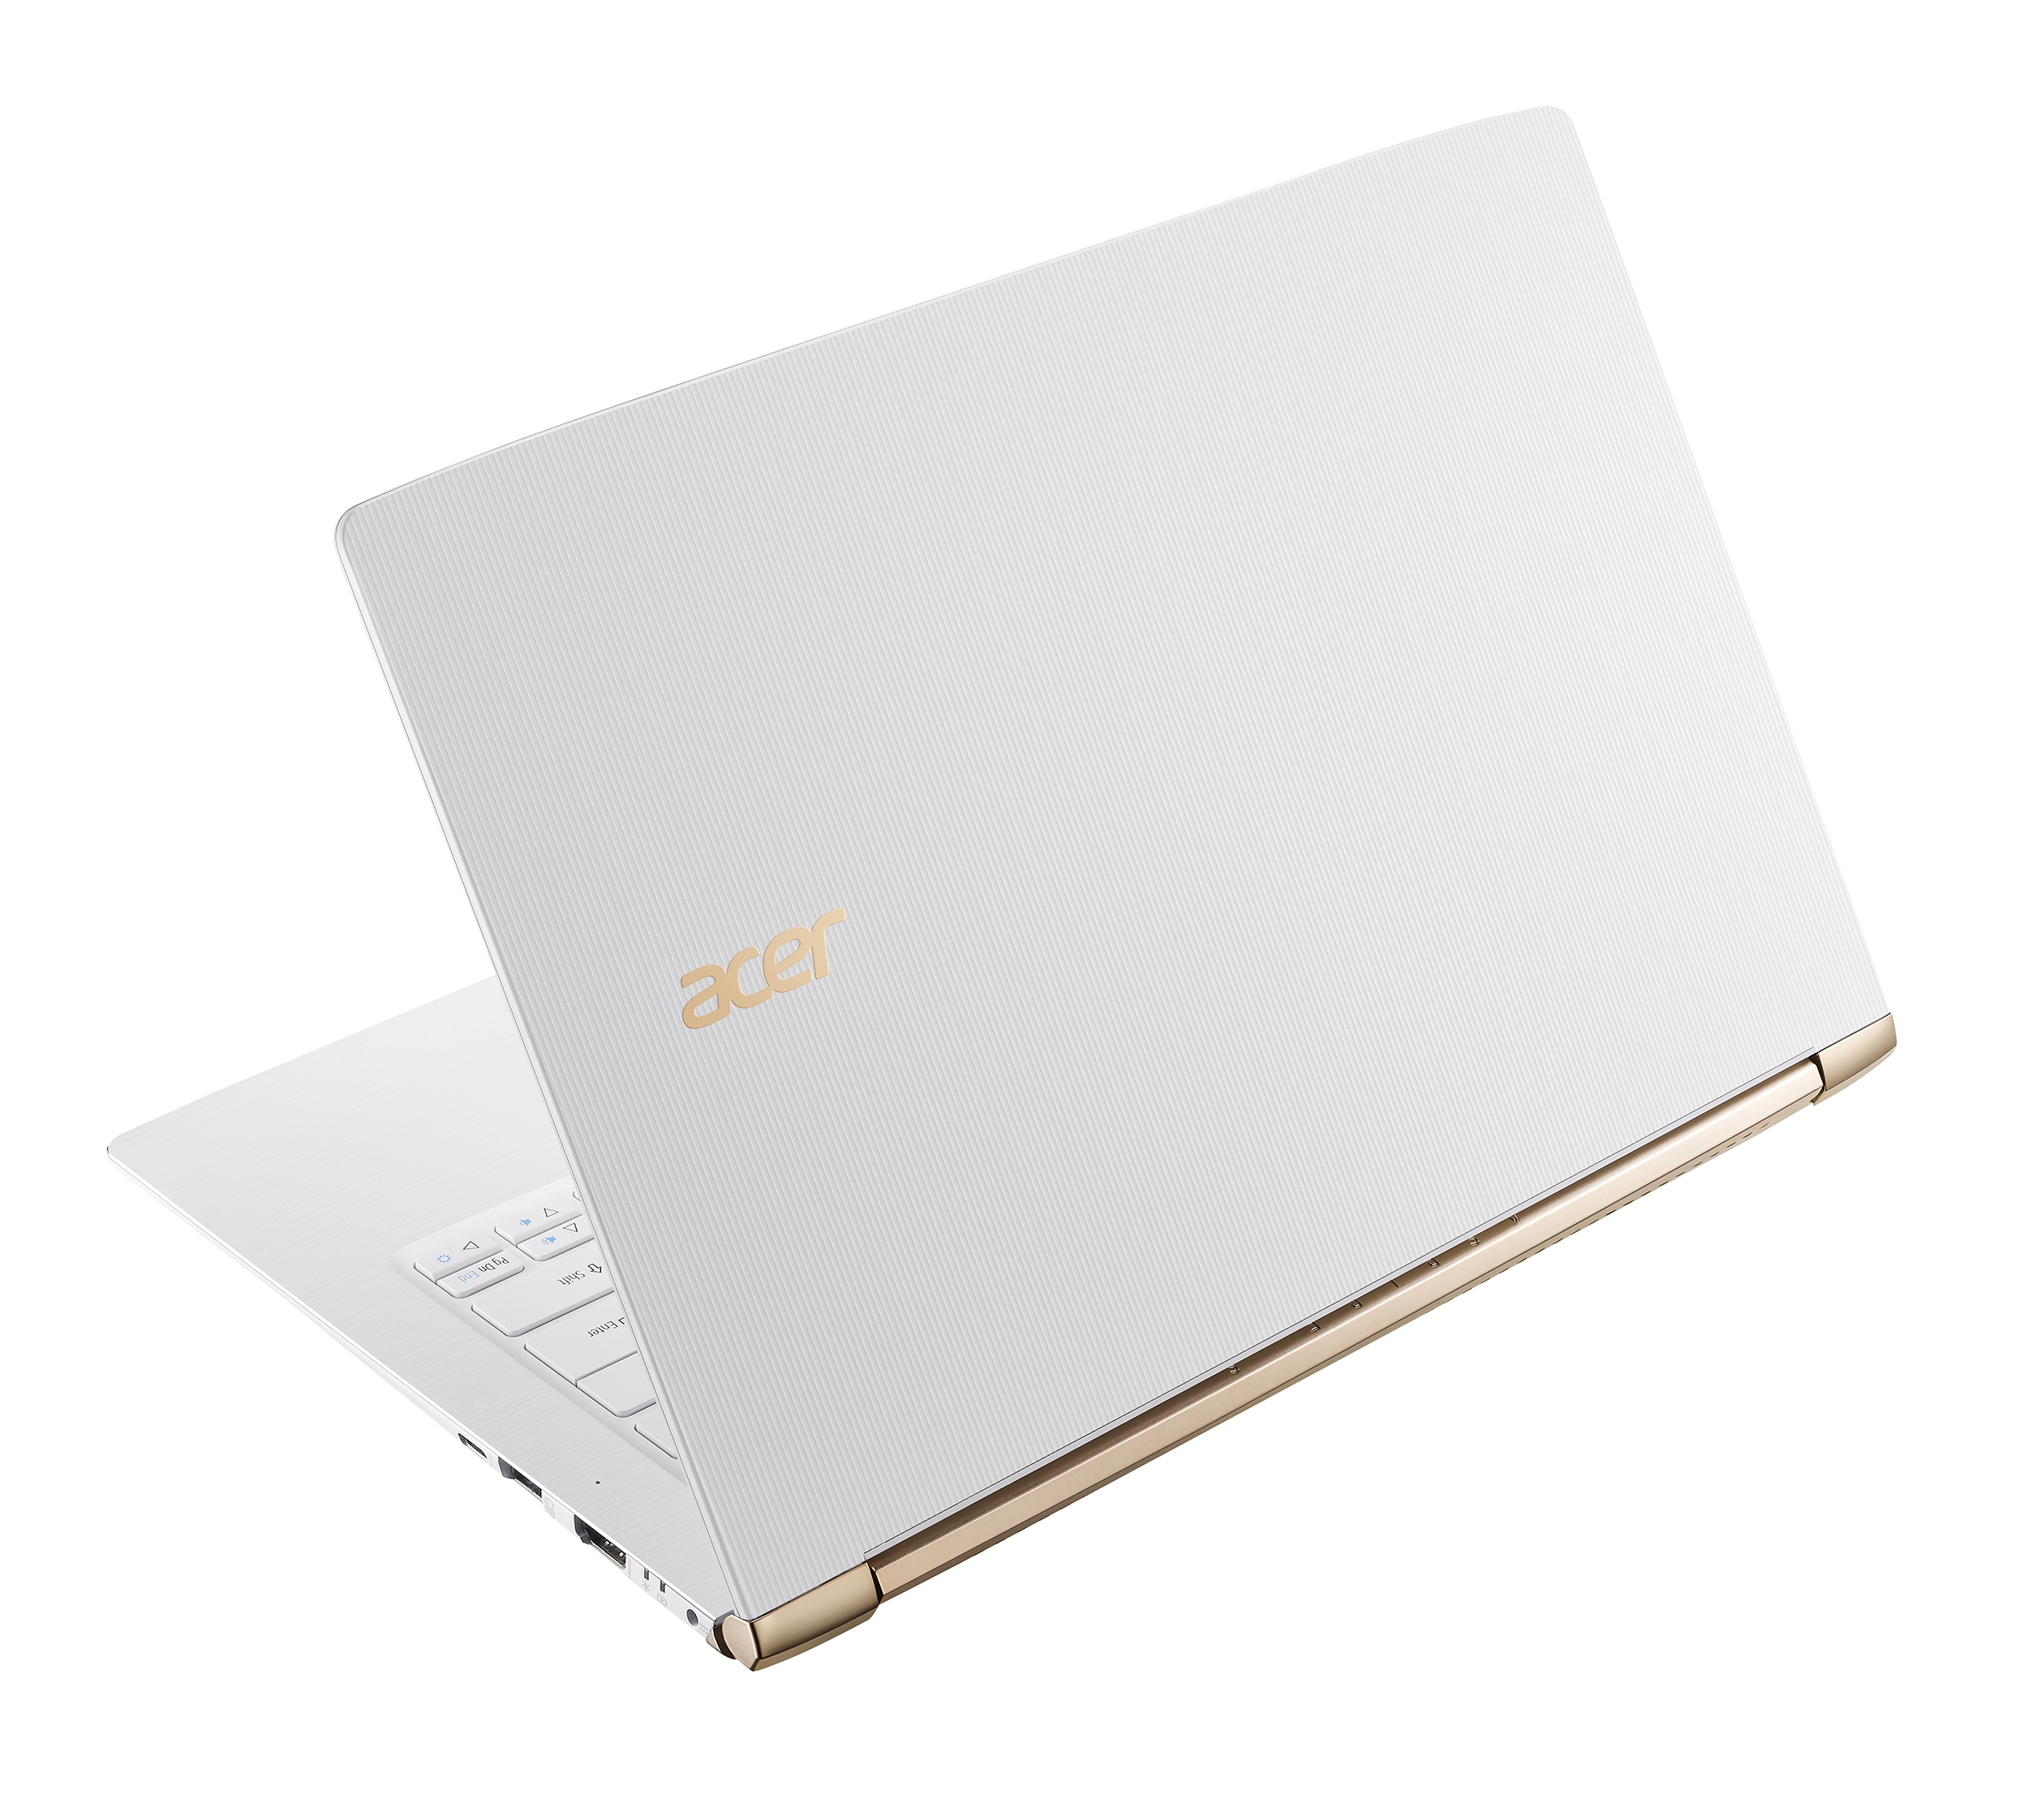 The Acer Aspire S 13 with Windows 10